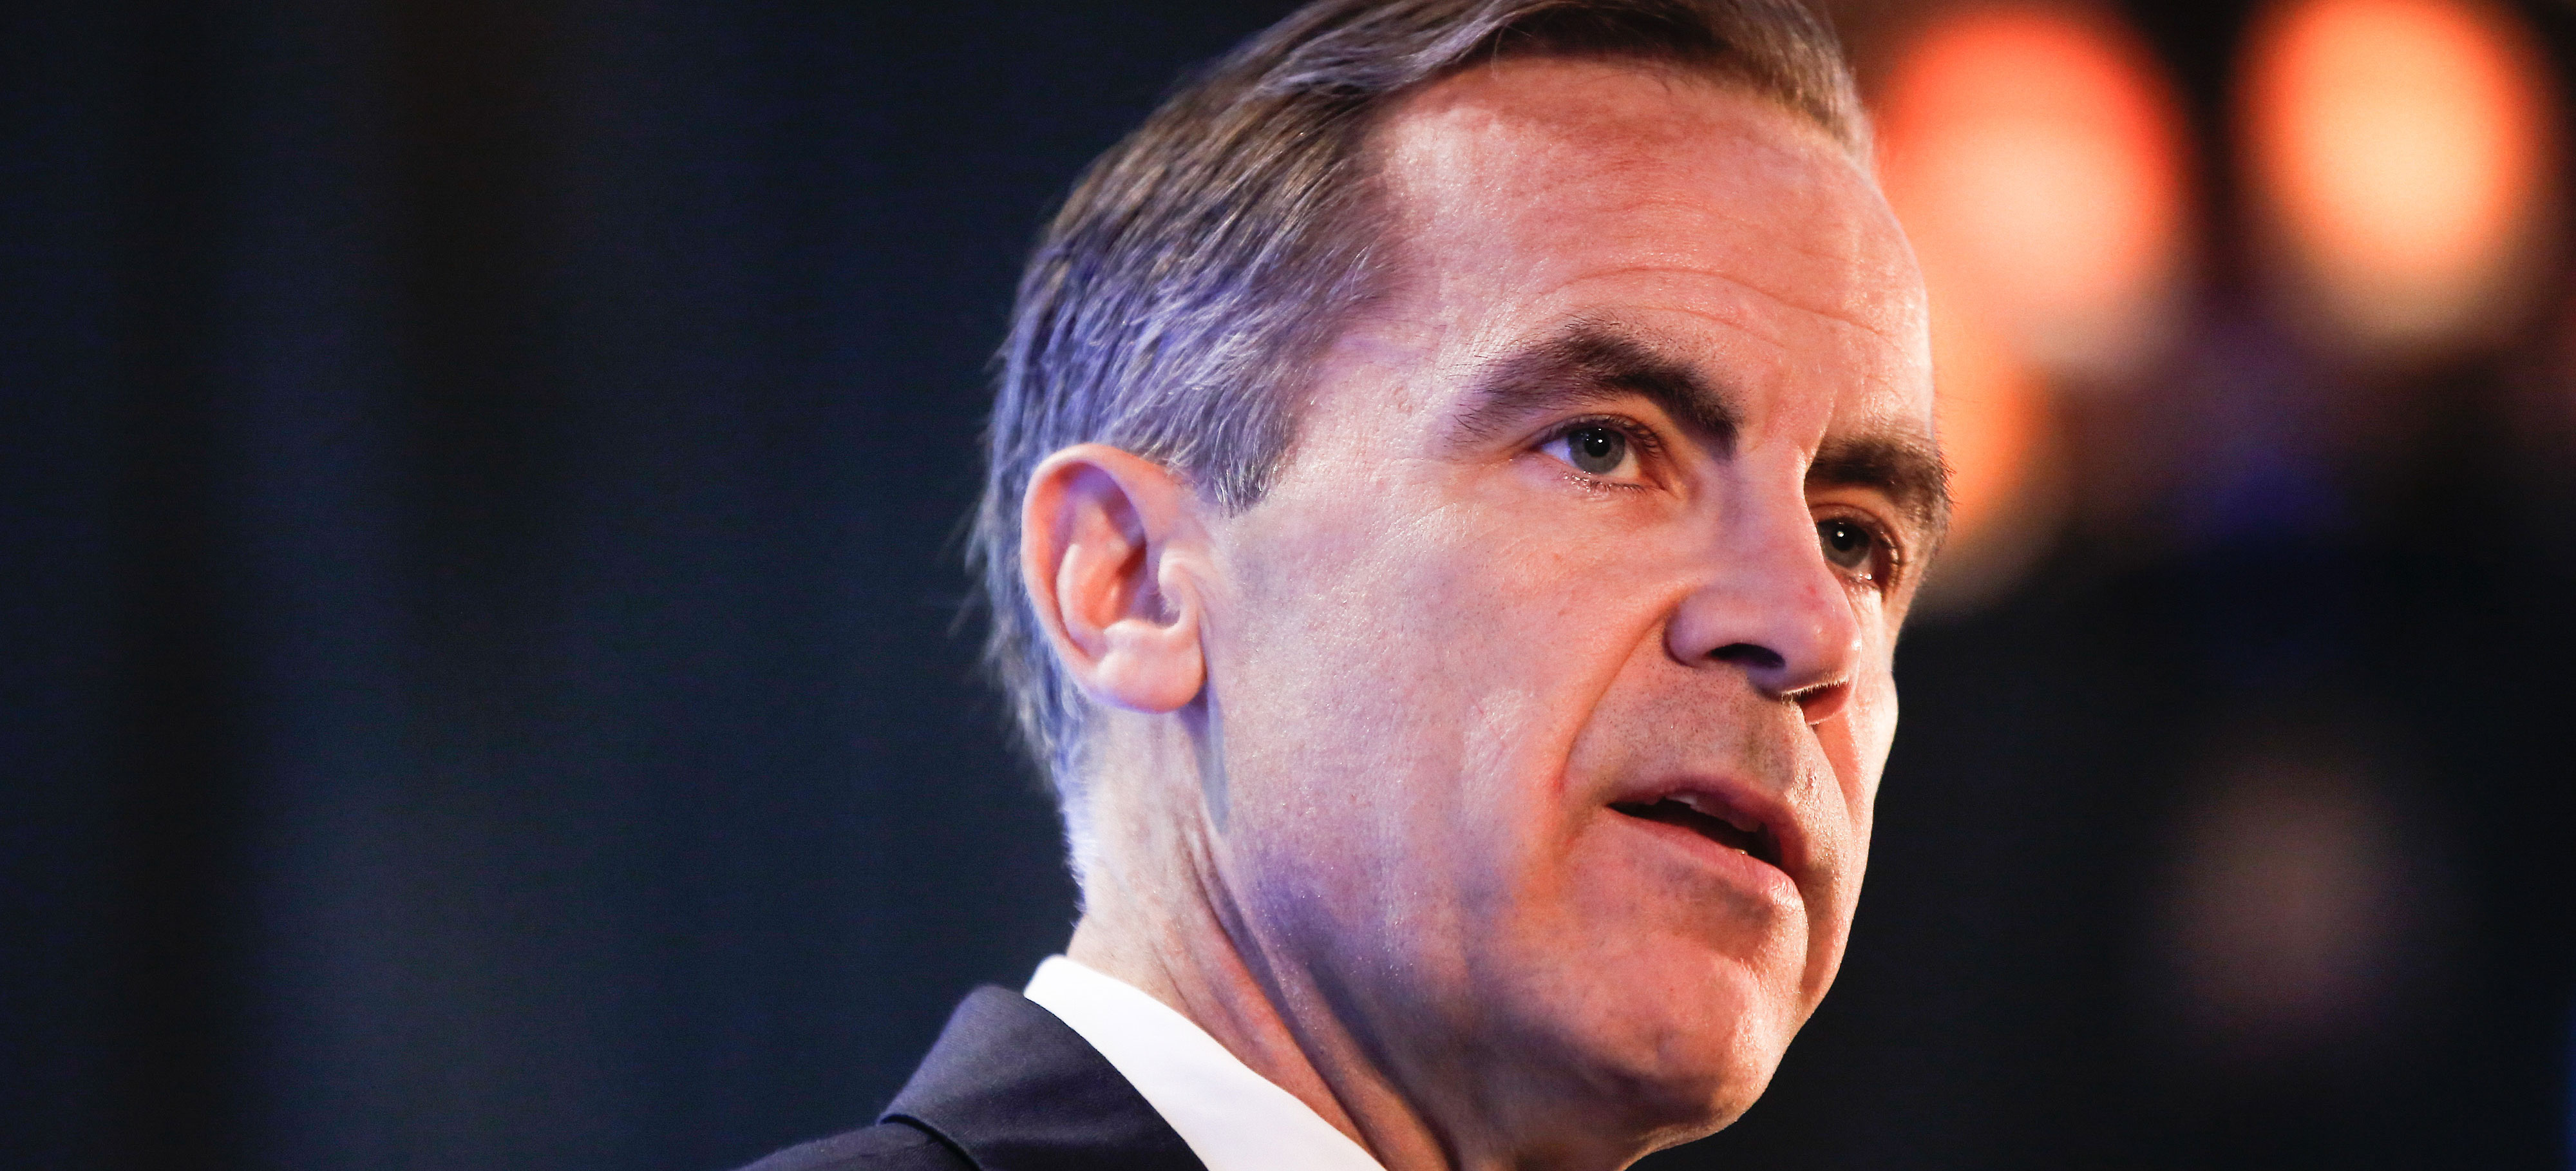 BIS Taps BOE’s Governor Mark Carney to Chair GEM and ECC Committees